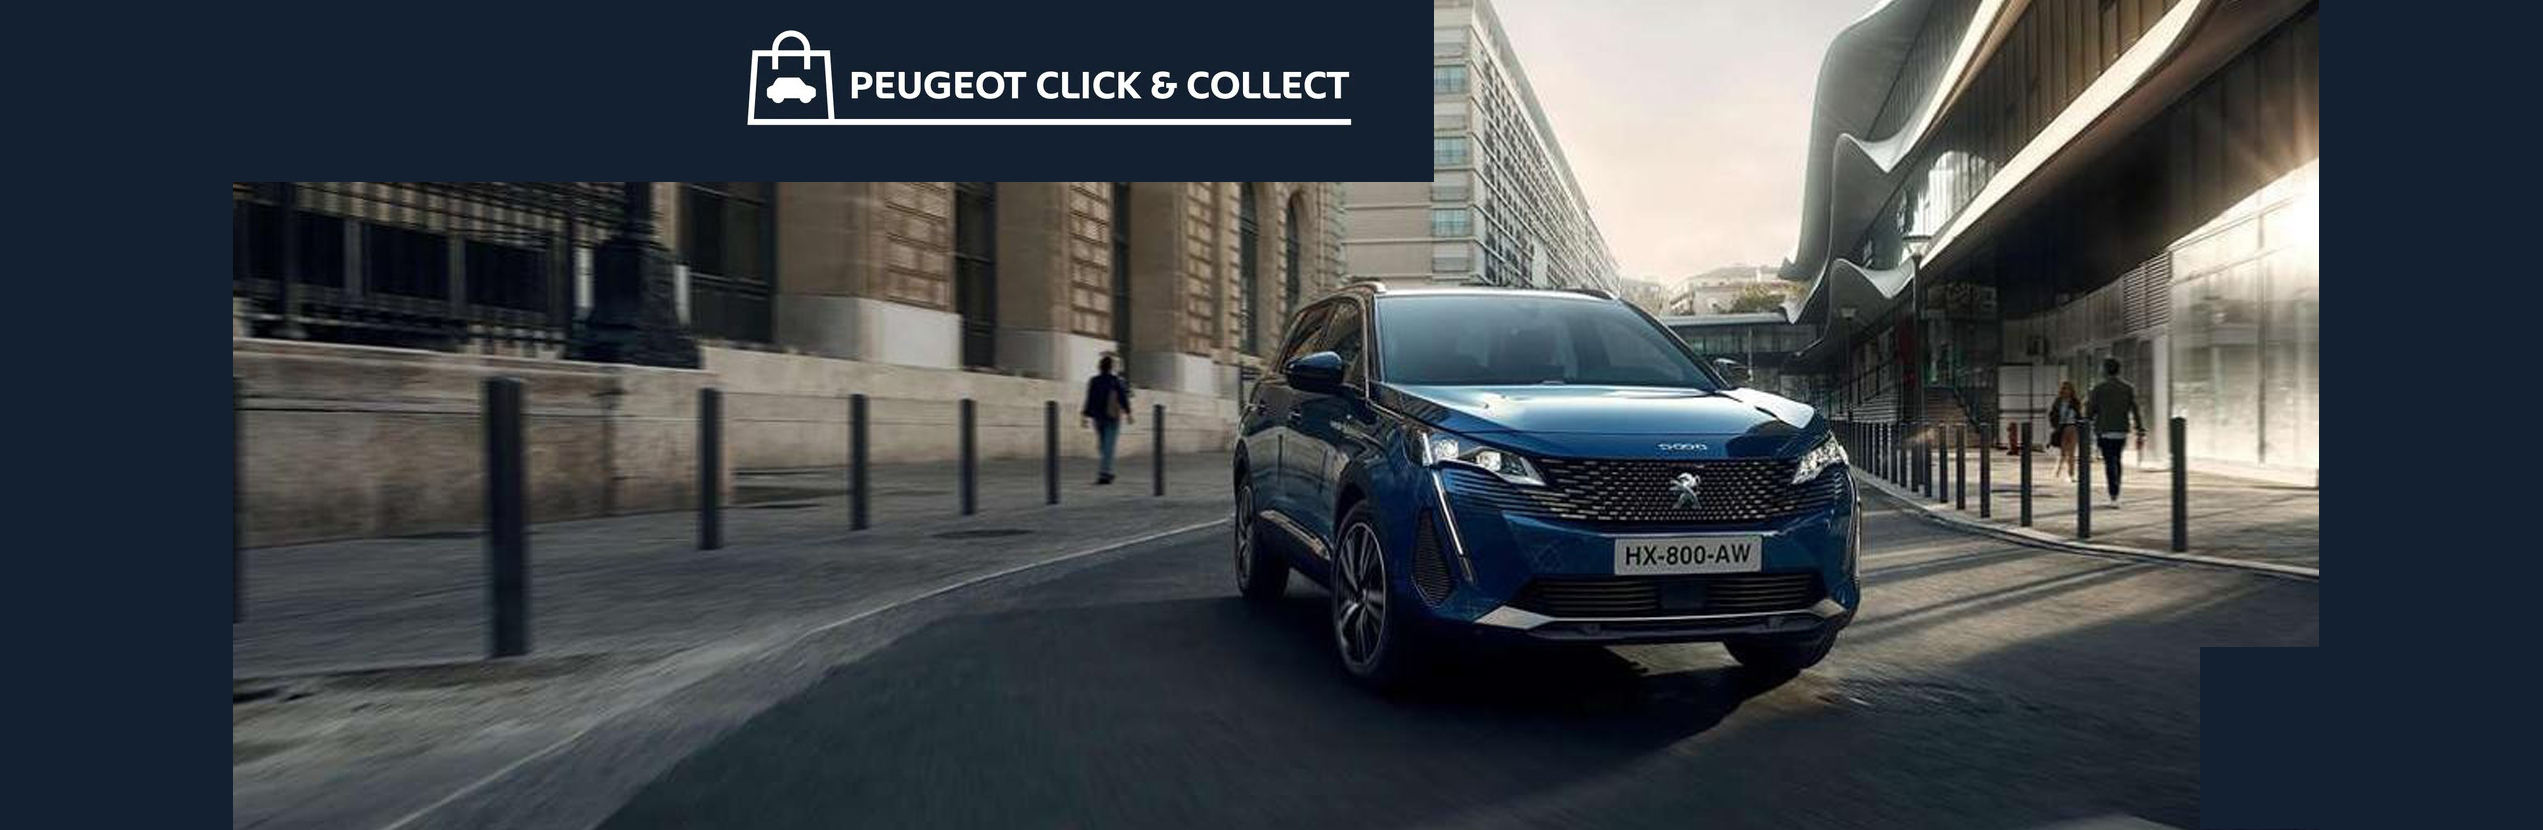 PEUGEOT CLICK & COLLECT